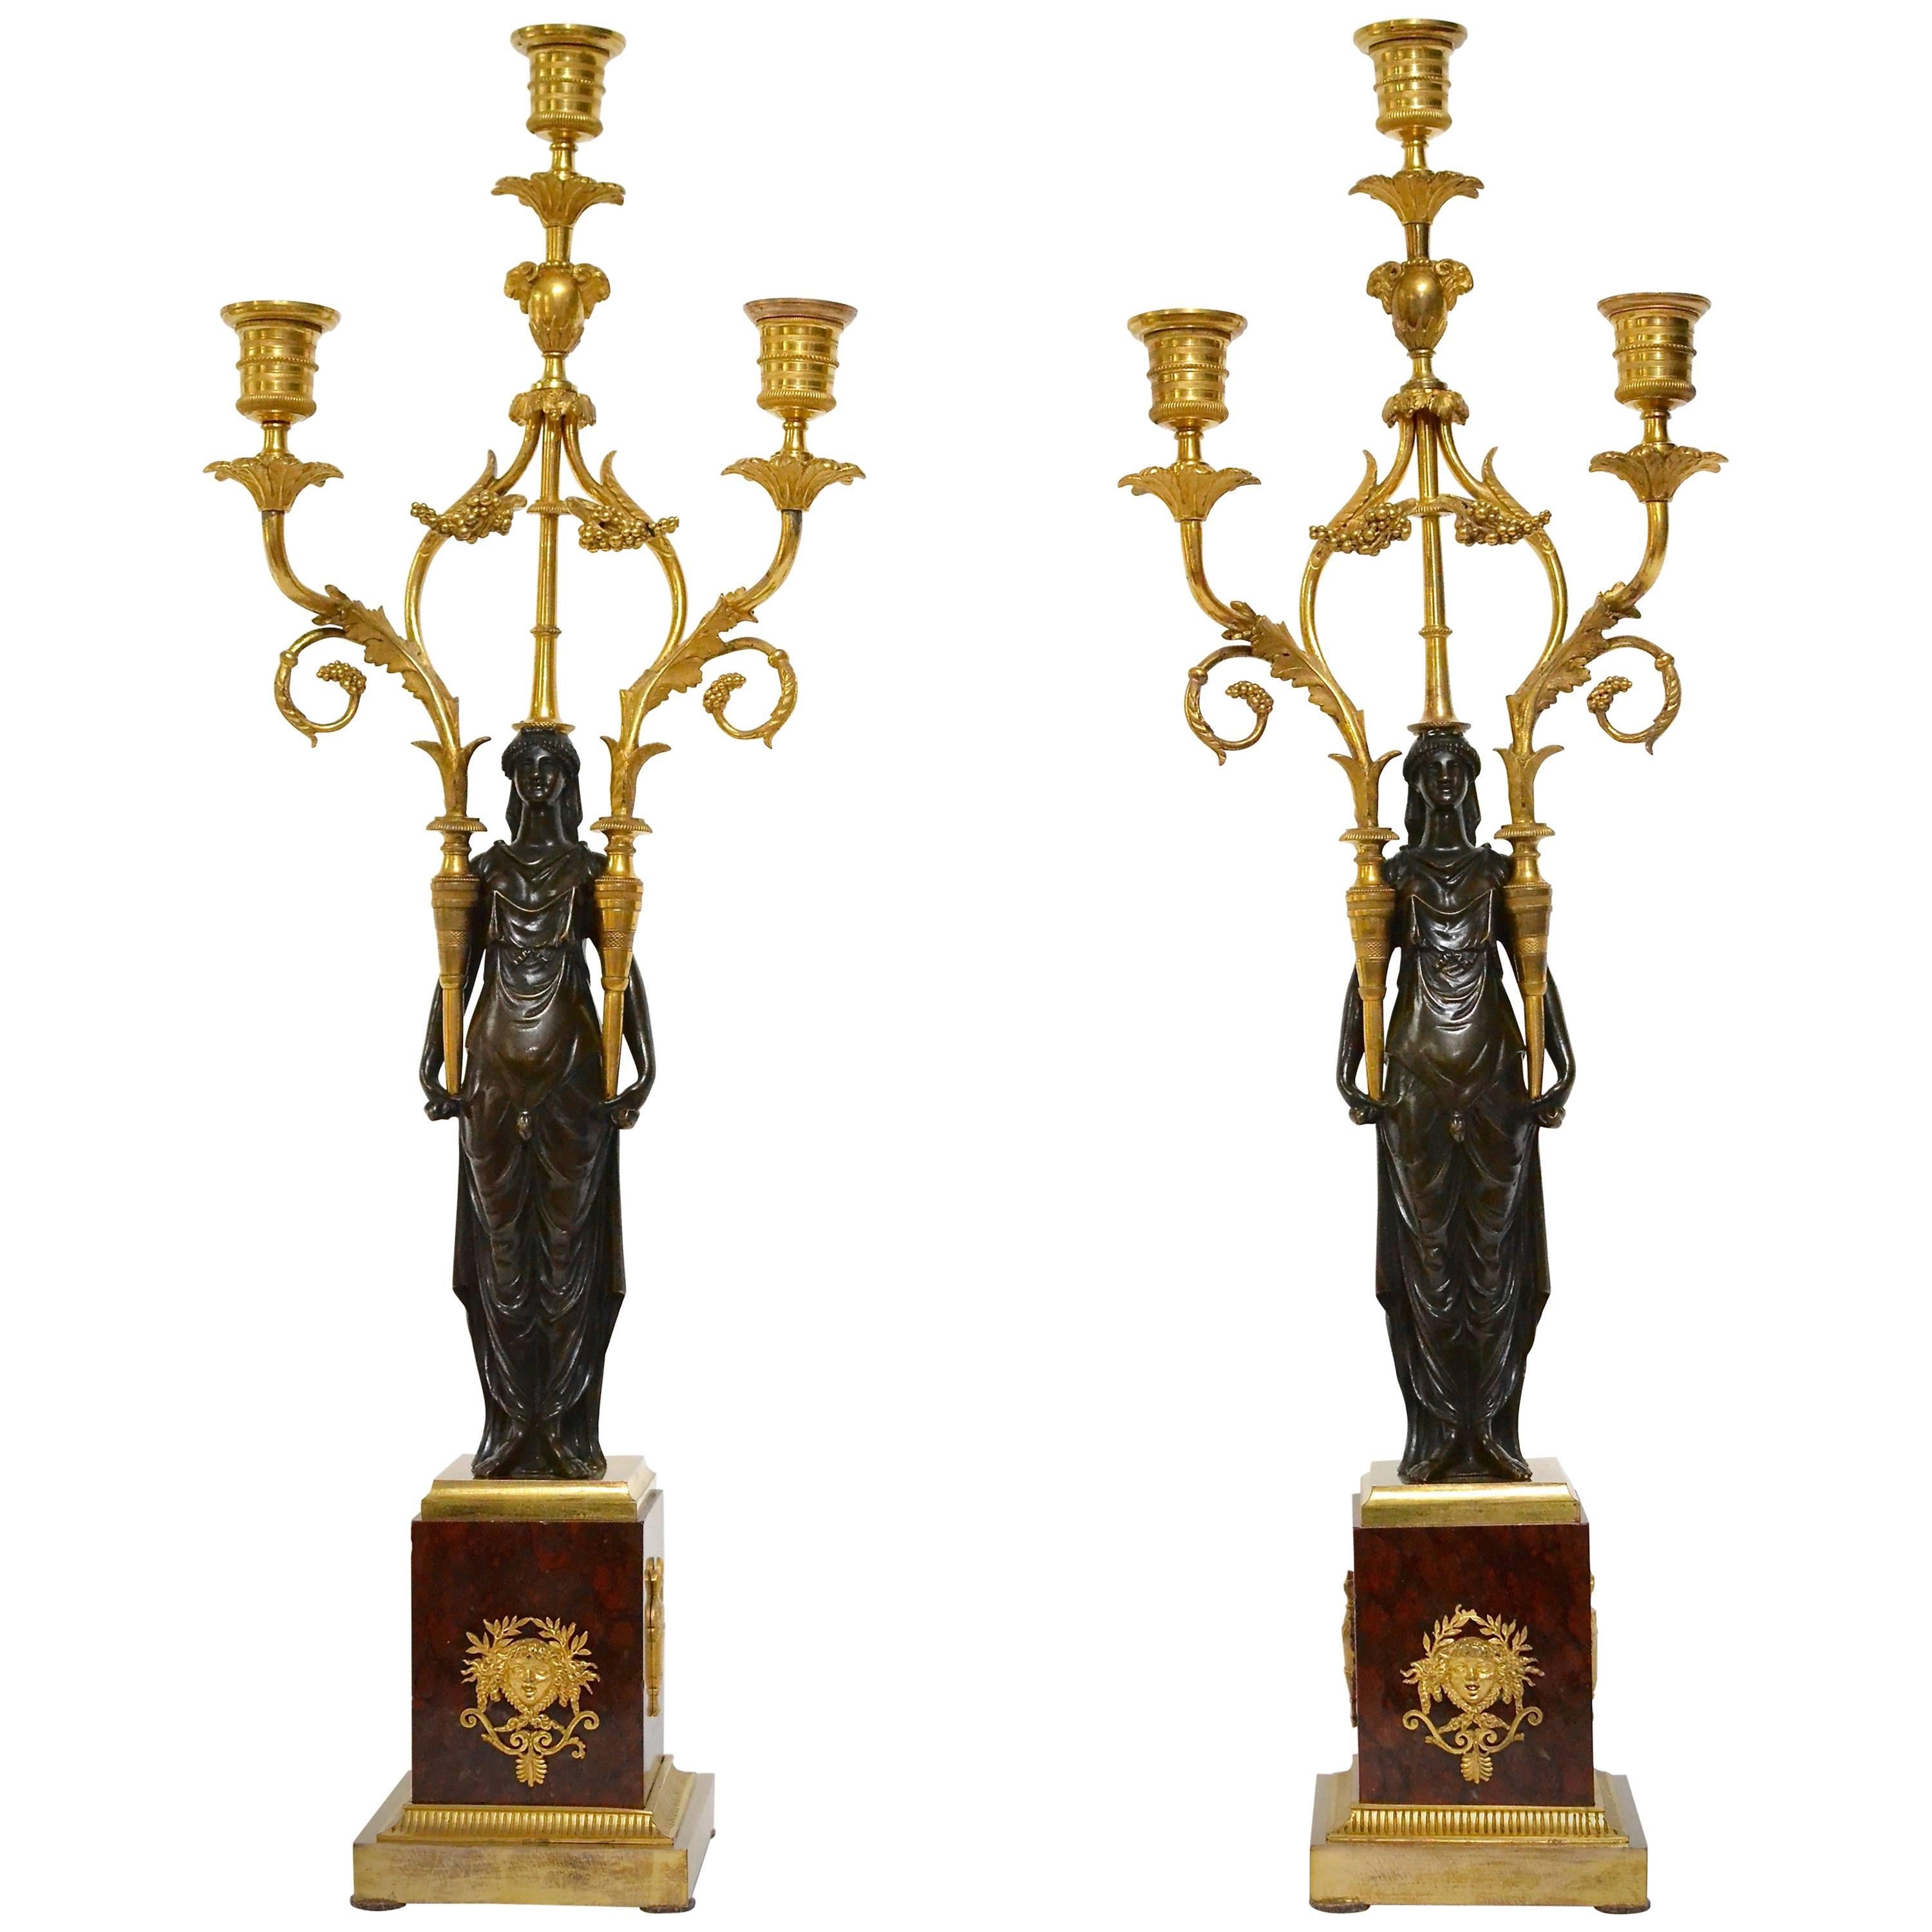 Pair of Louis XVI Gilt Bronze and Patinated Candelabra on Red Marble Bases